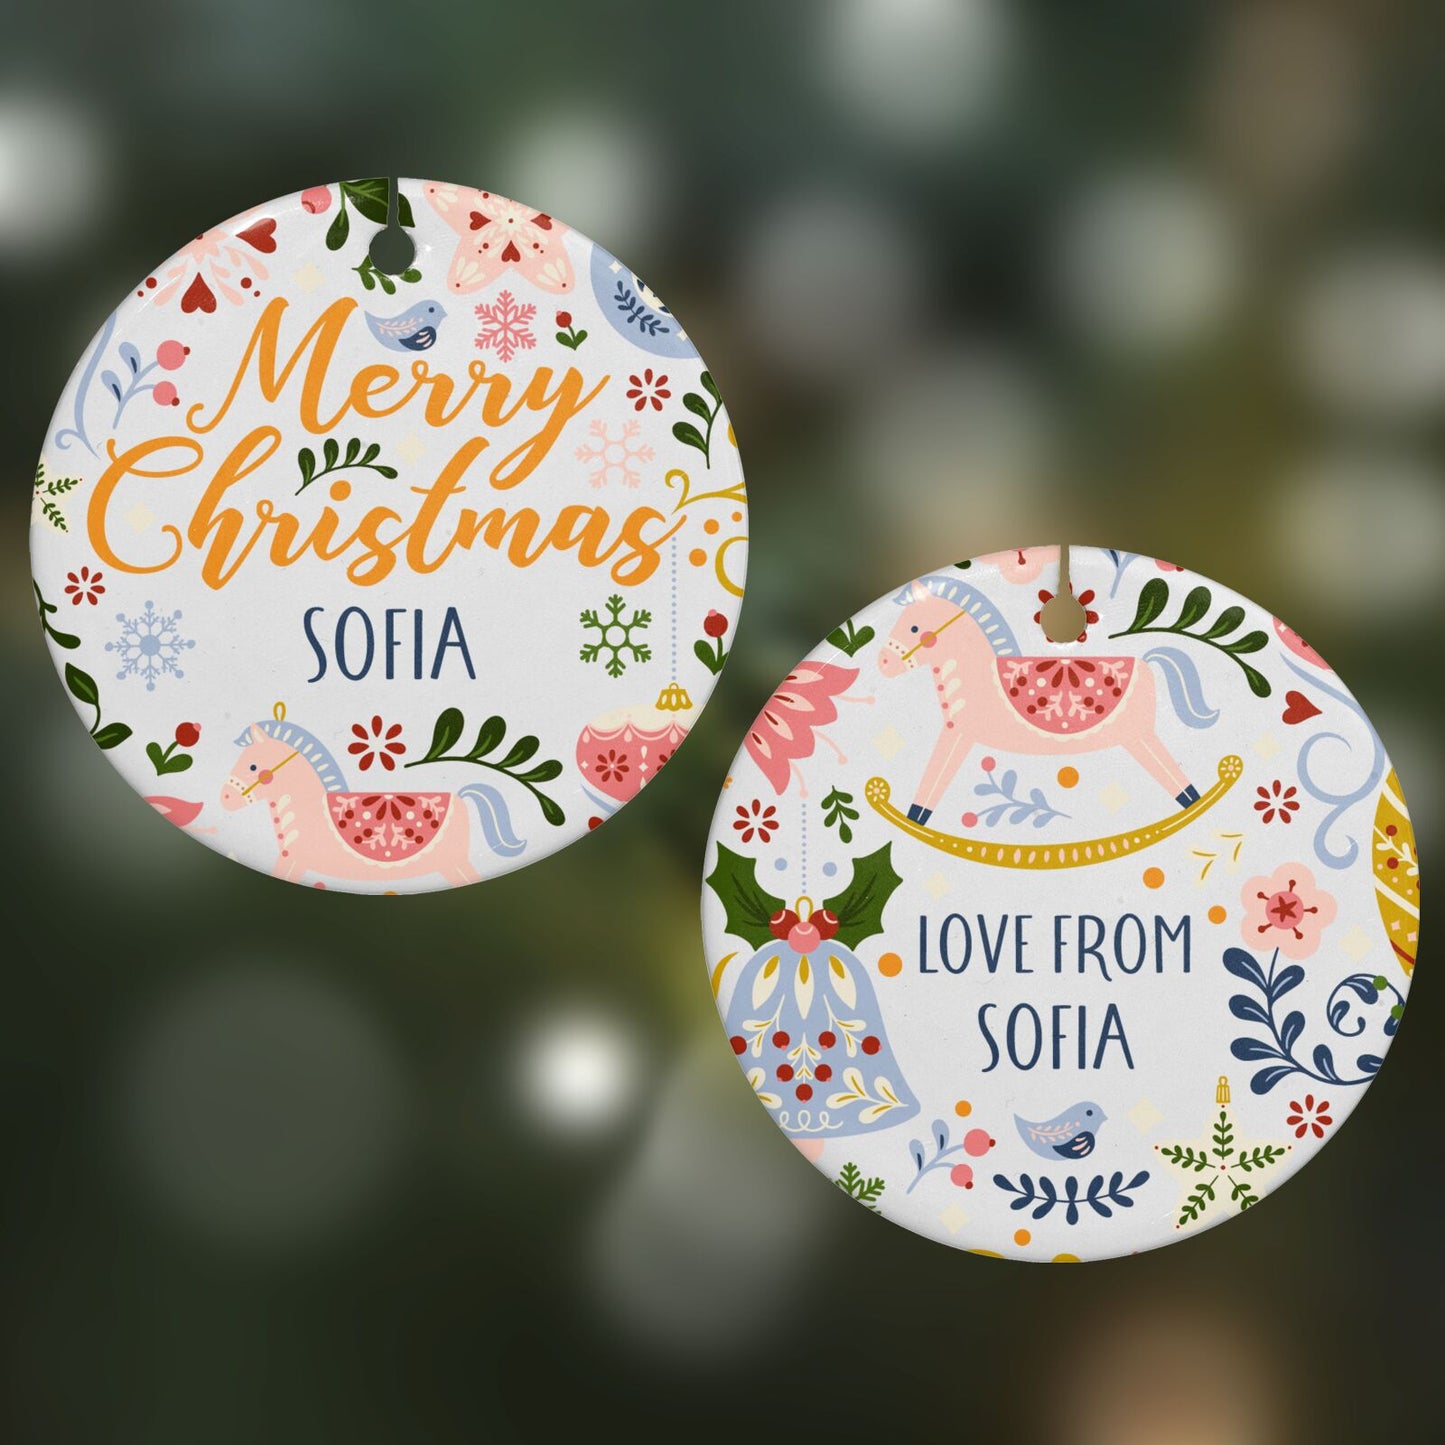 Merry Christmas Illustrated Round Decoration on Christmas Background